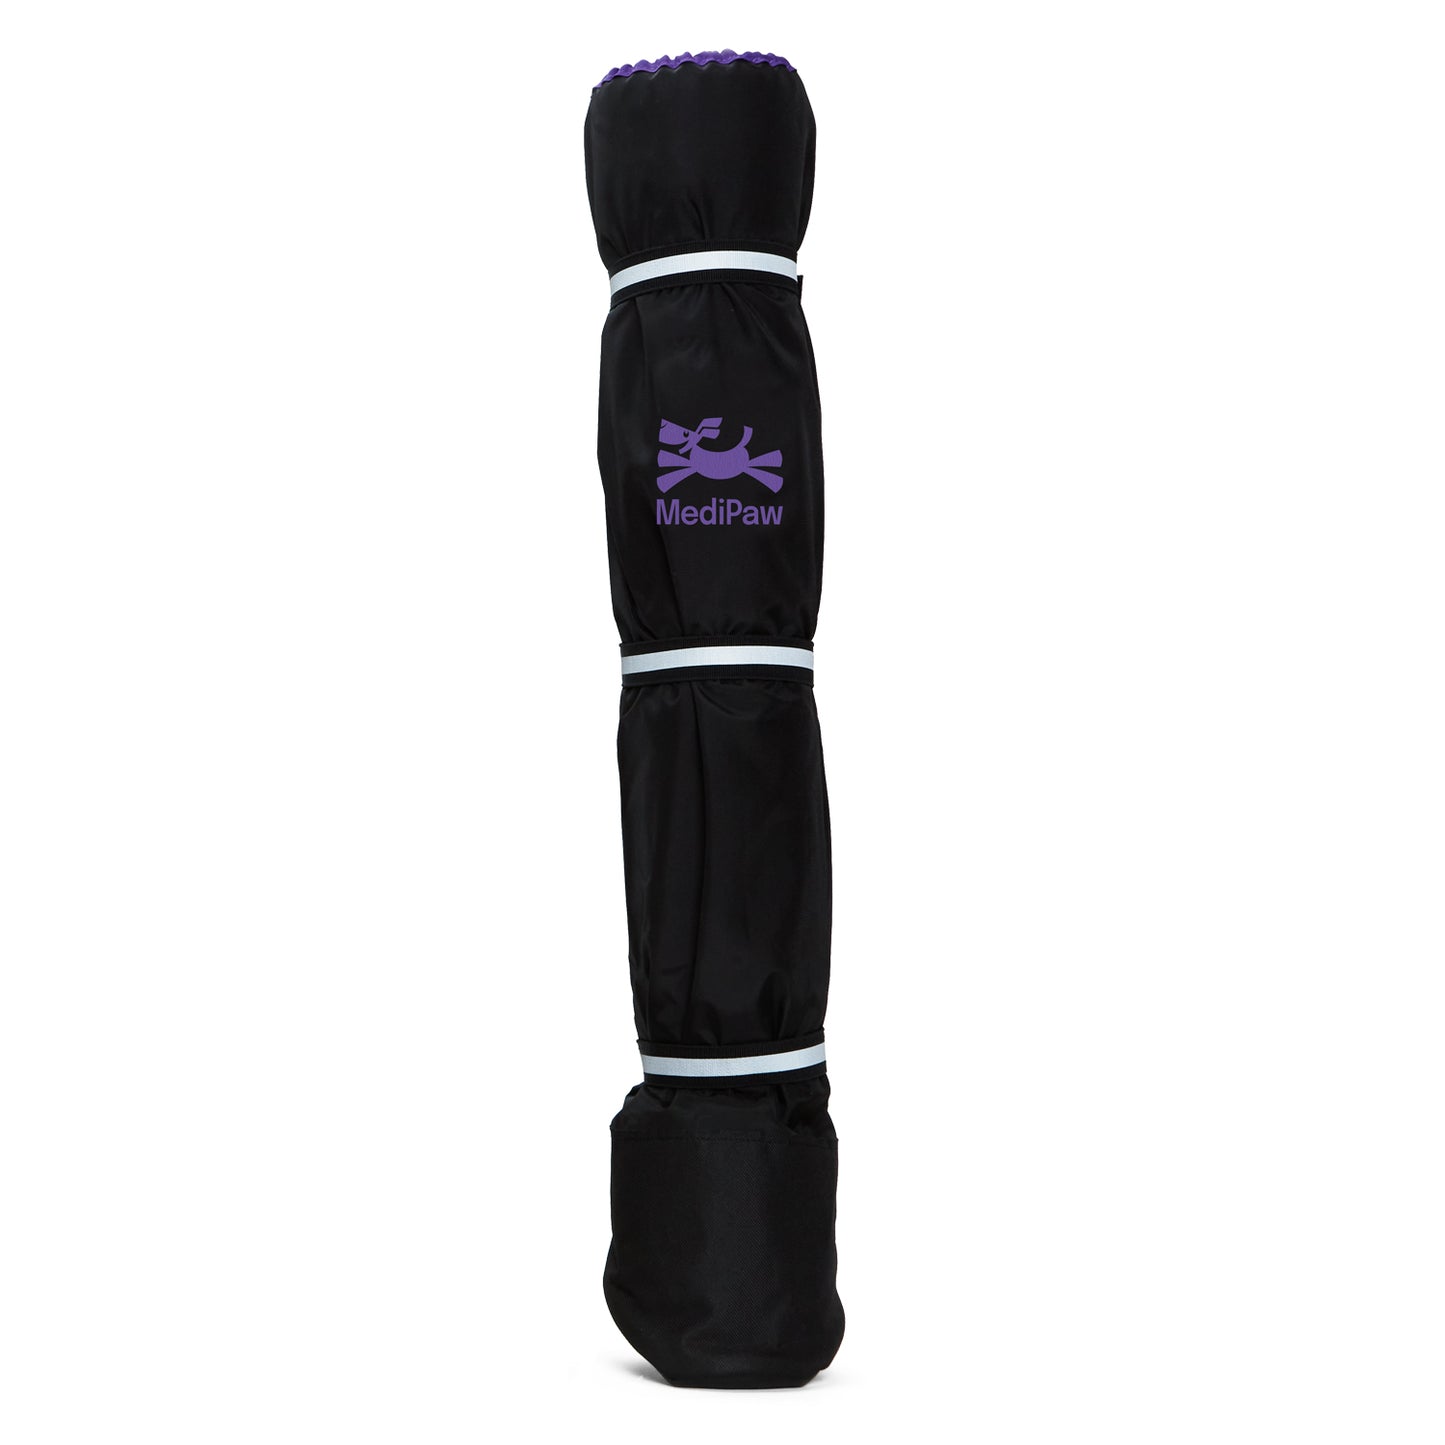 A black MediPaw: Healing Slim Boot with a purple Your Whole Dog logo on it.